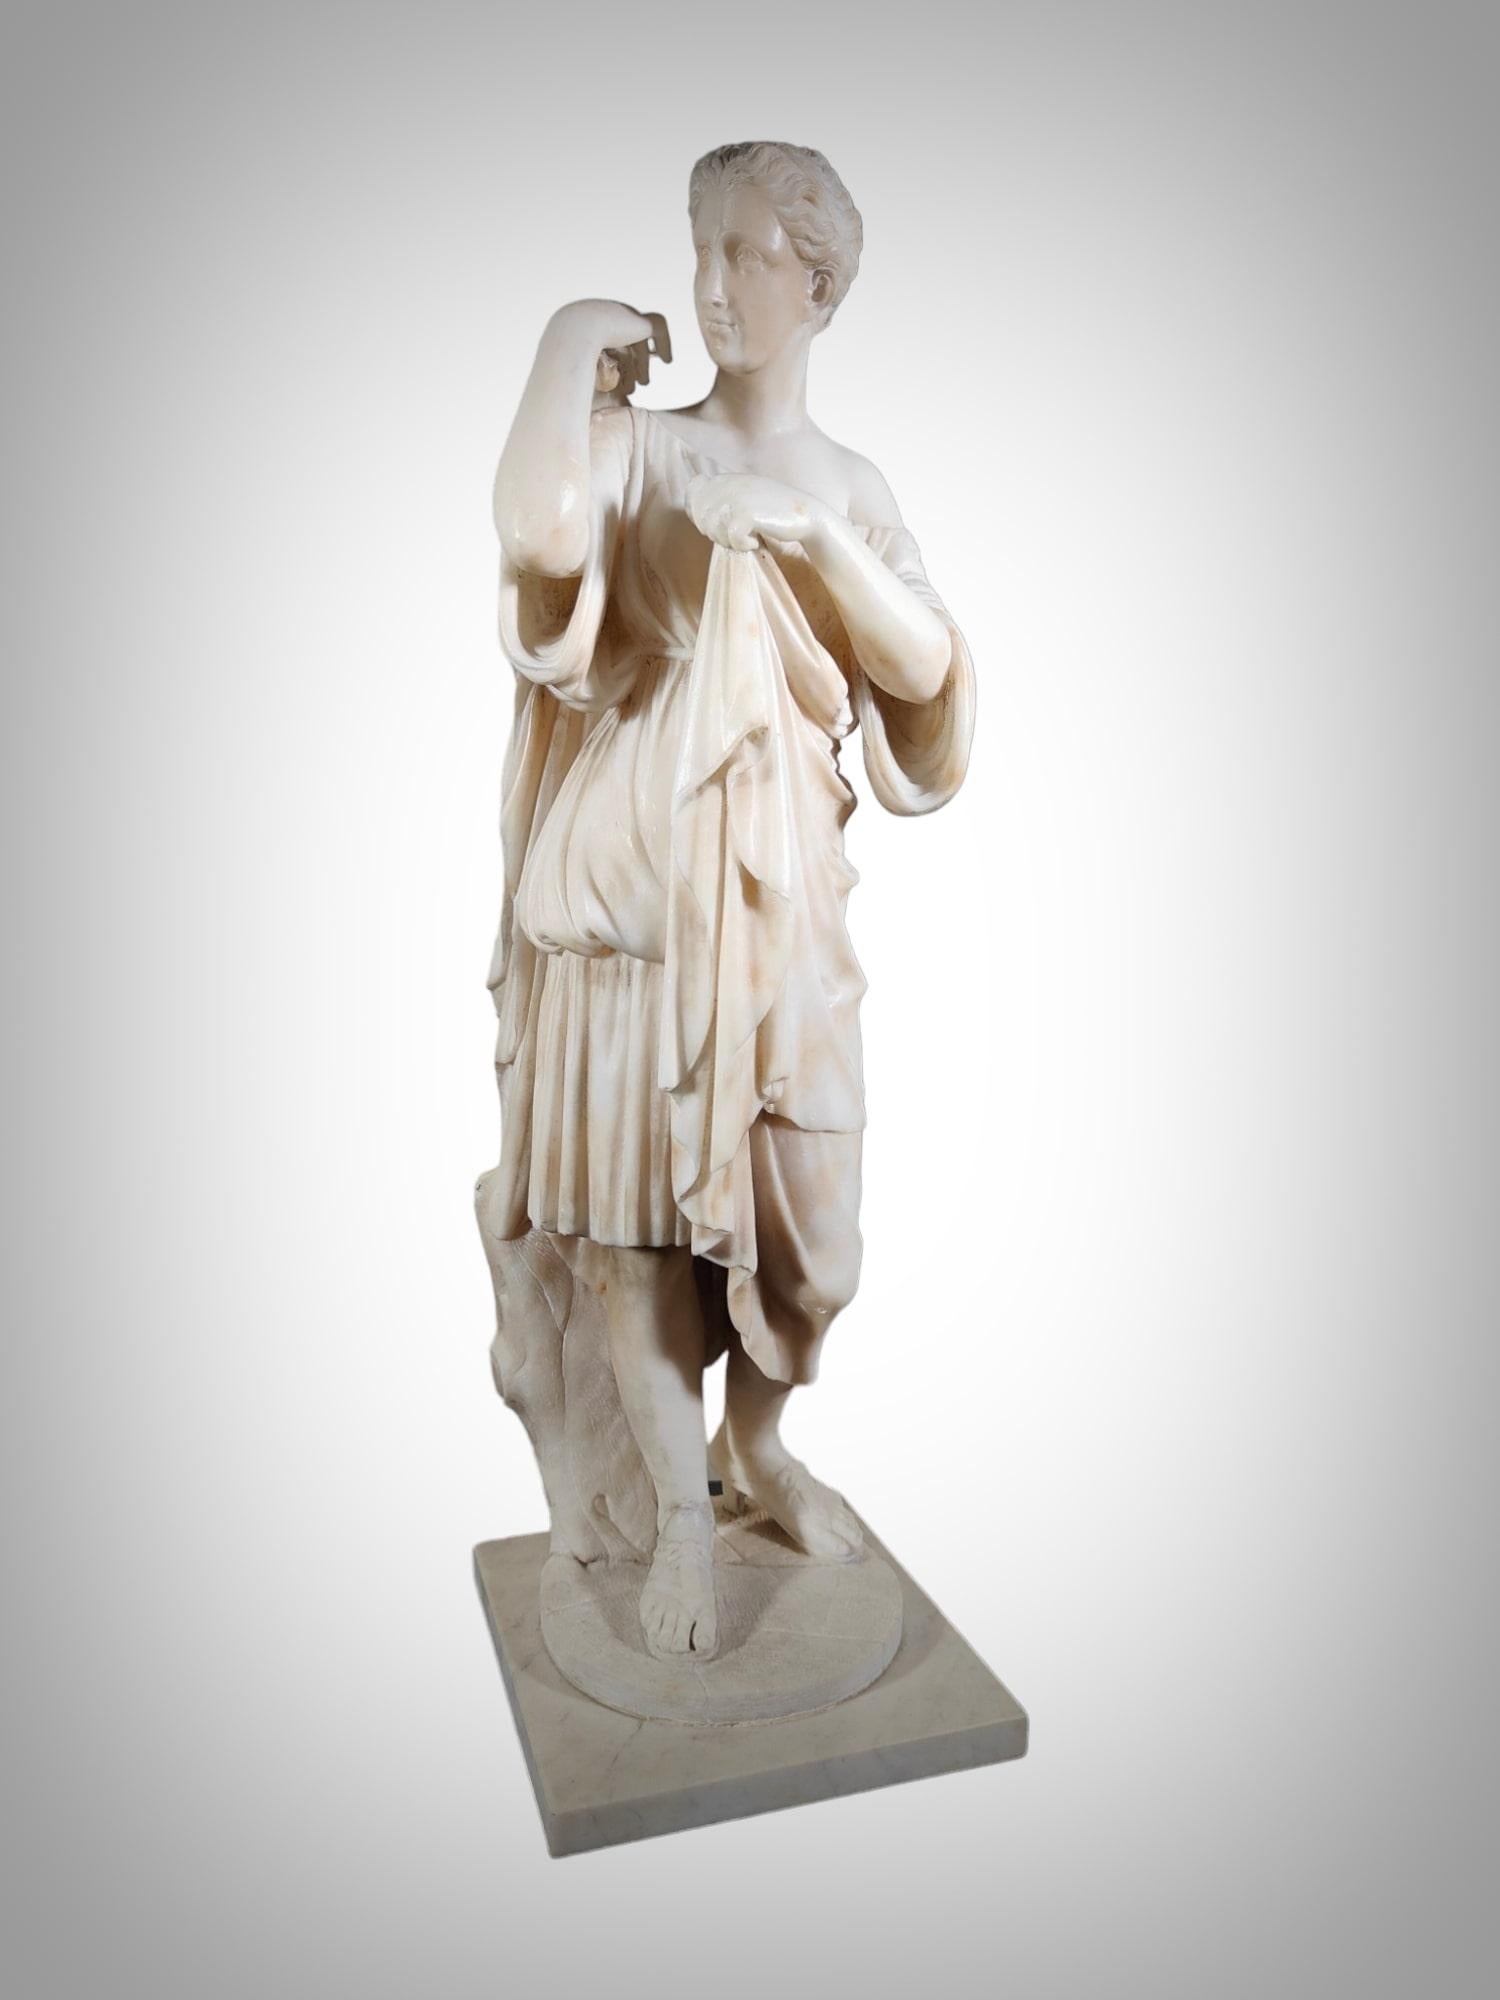 It is the sculpture of a woman covered with a draped chiton, probably representing the goddess Artemis and traditionally attributed to the sculptor Praxiteles. Found in the ancient town of Gabios, it was part of the Borghese family collection. It is